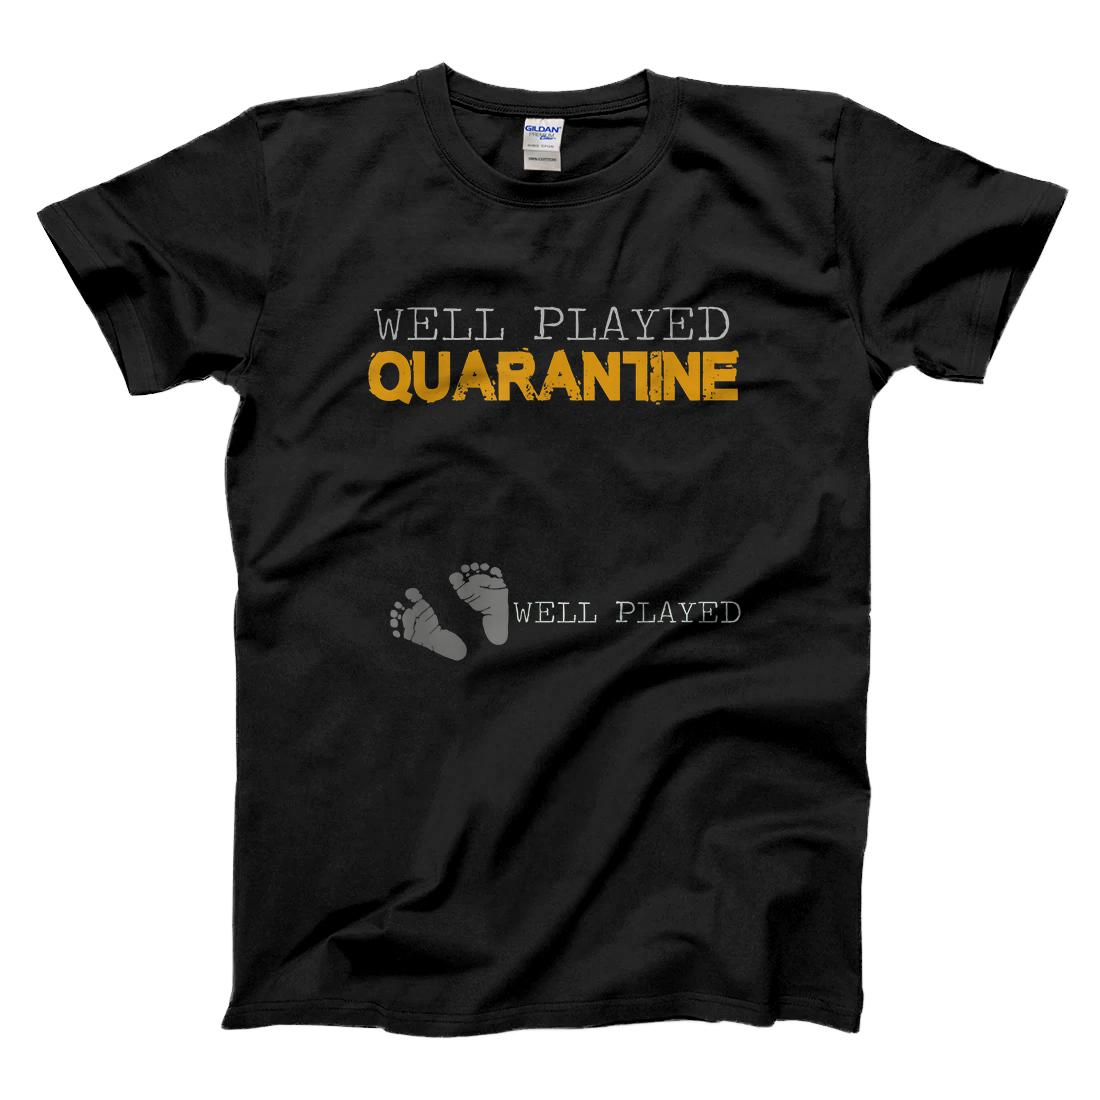 Personalized Pregnancy Announcement - Well Played Quarantine T-Shirt